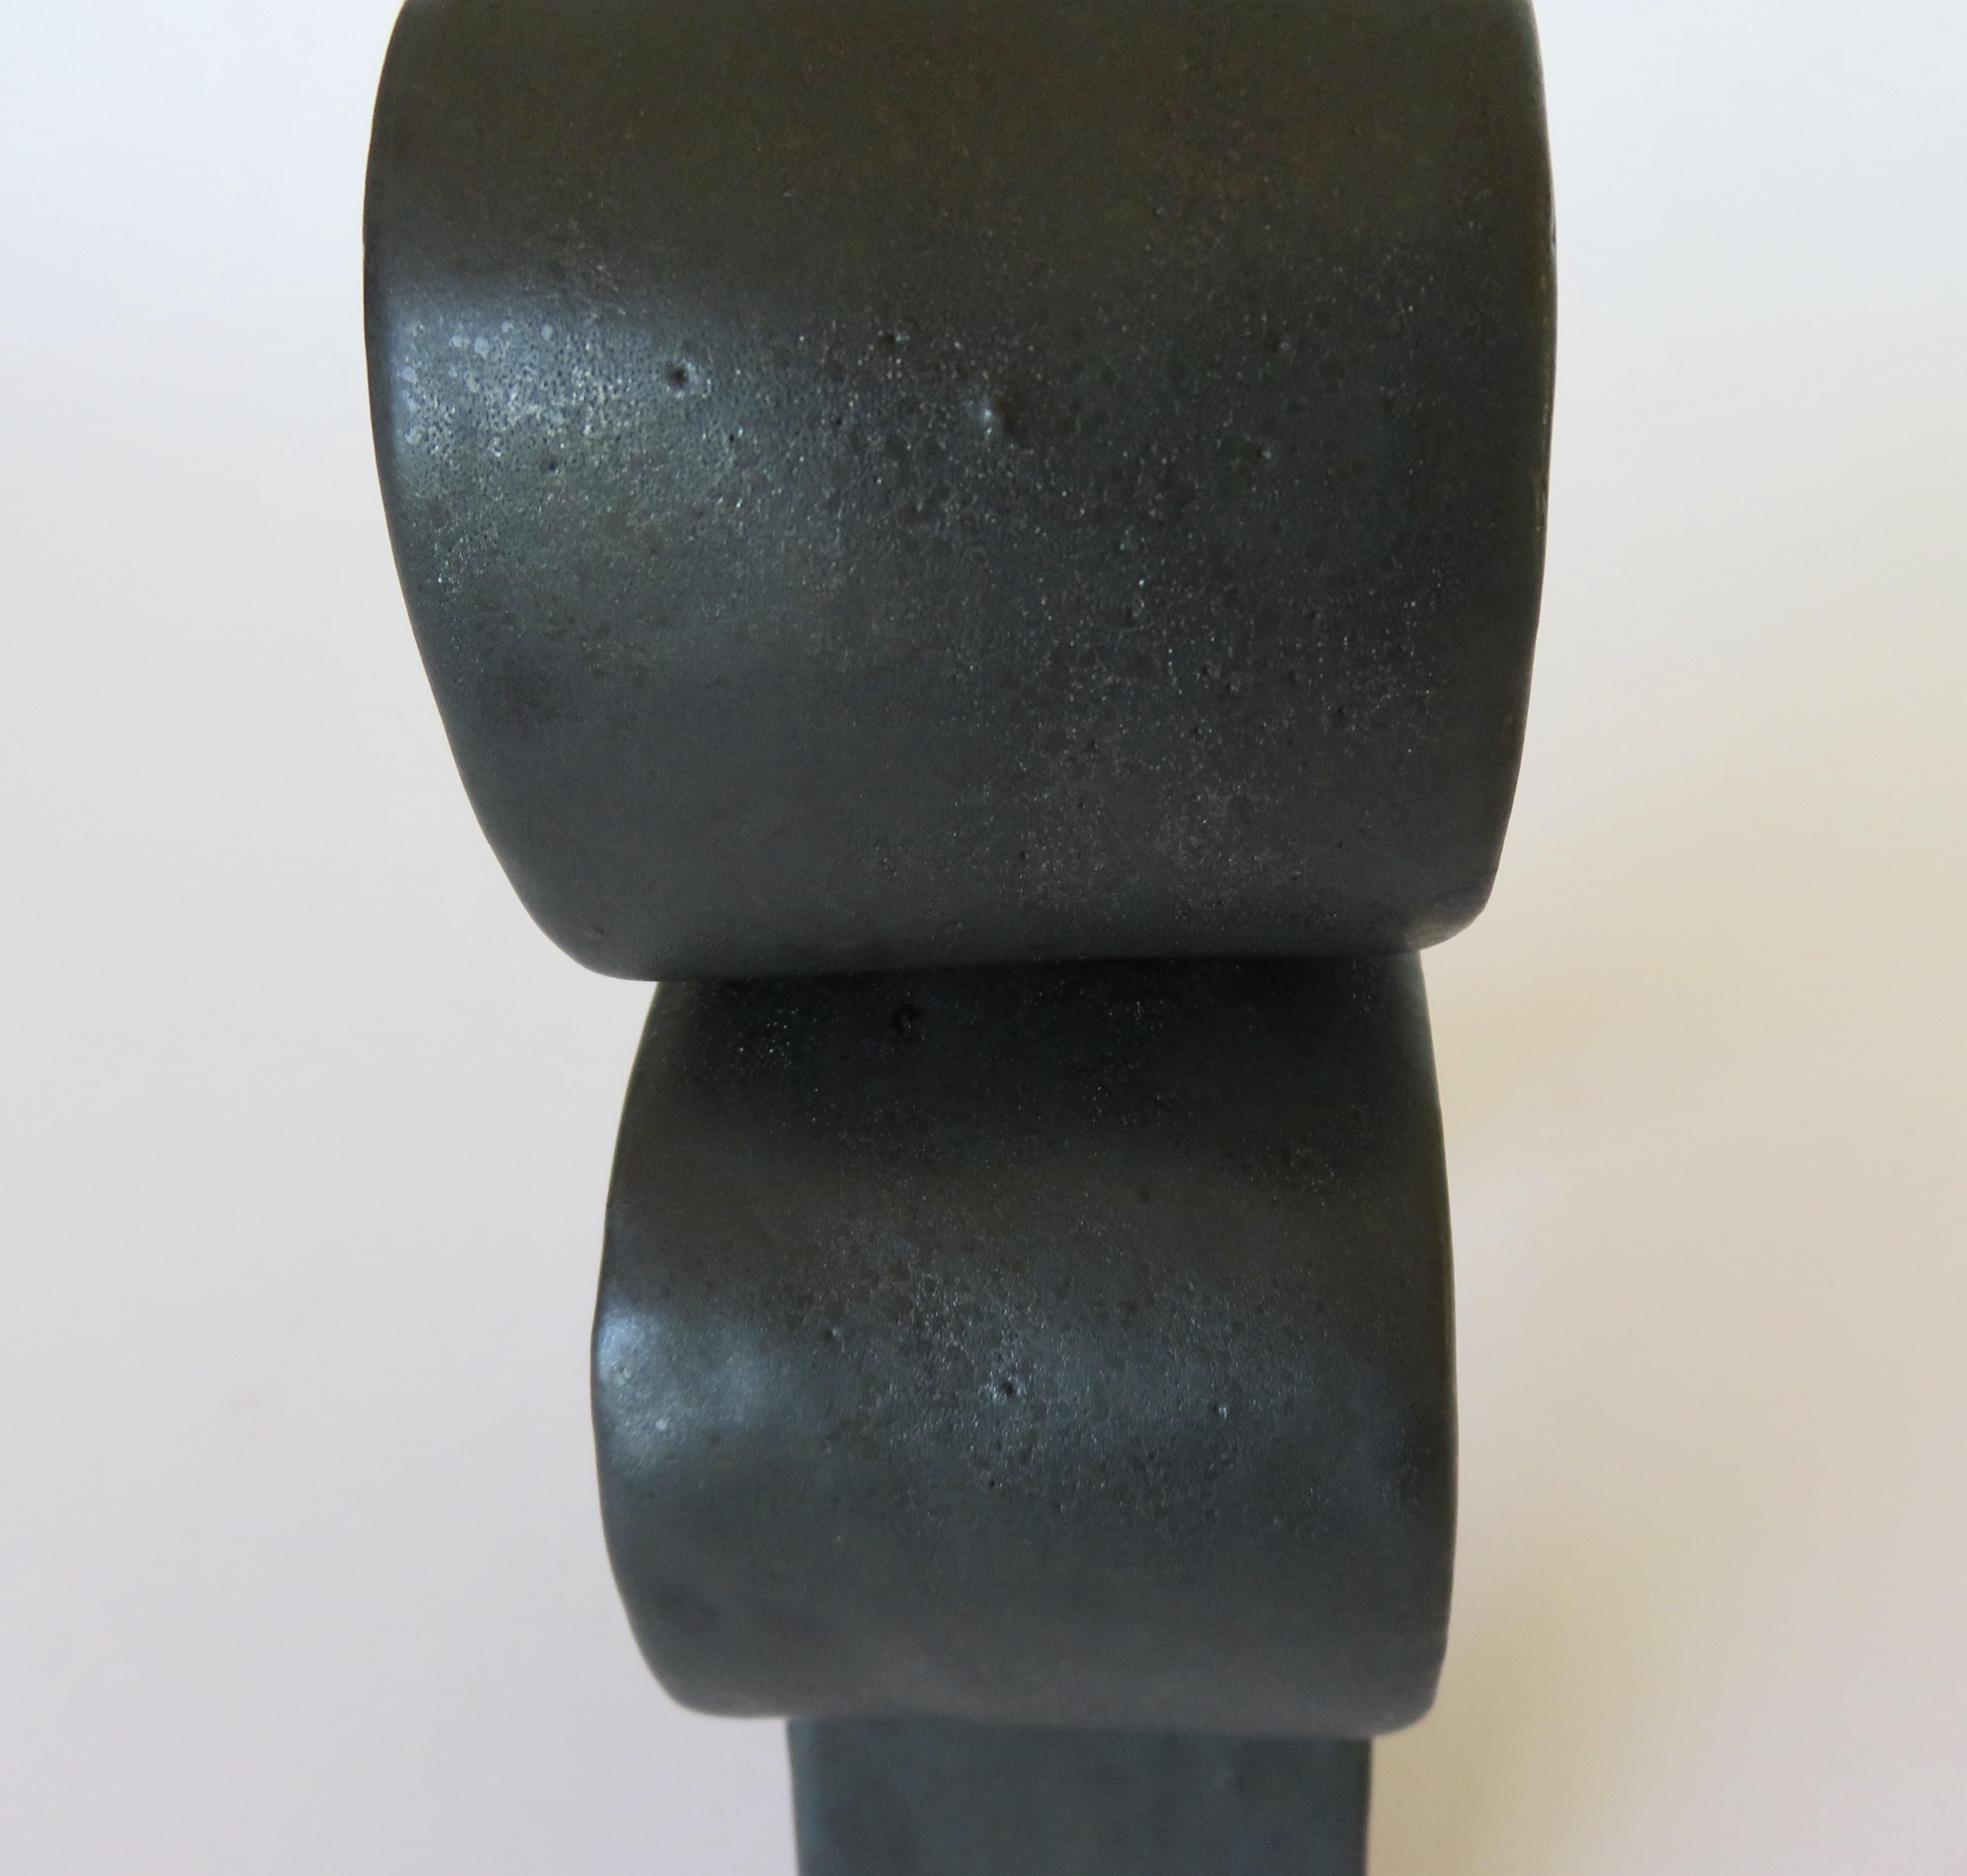 Metallic Black Hand-Built Ceramic Sculpture with Hollow Rings on Angled Legs 6